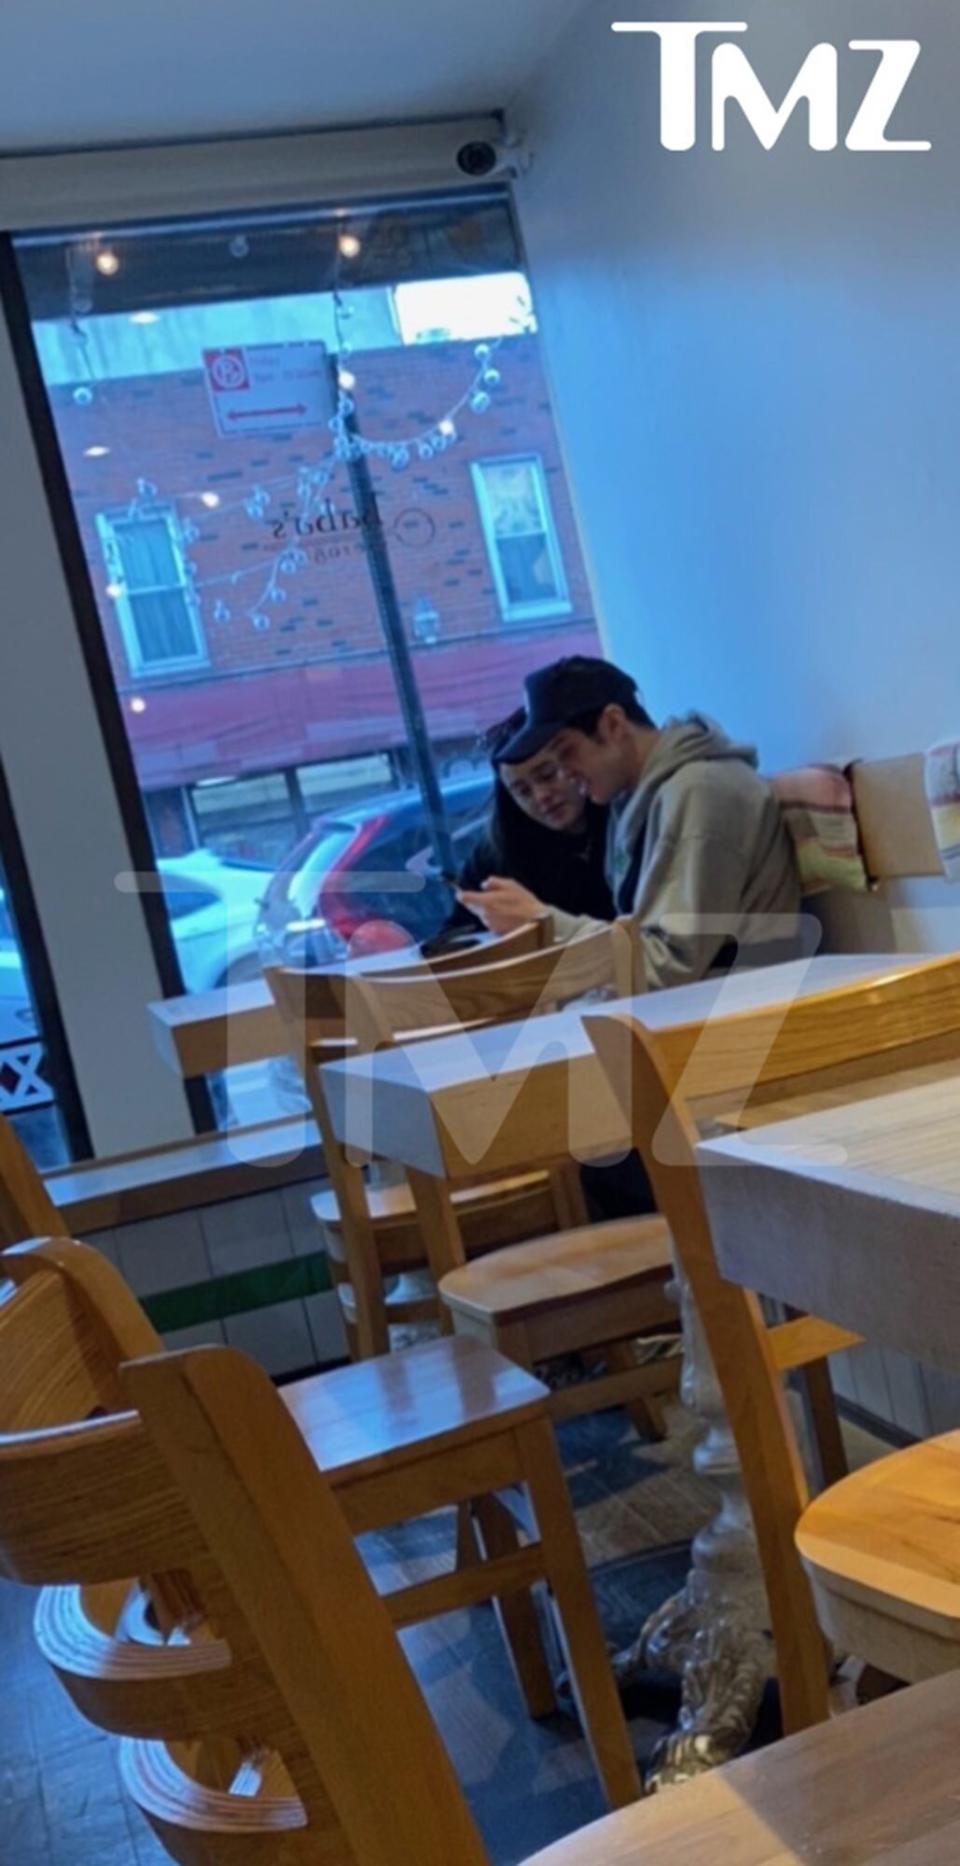 EXCLUSIVE - Pete Davidson and Chase Sui Wonders waiting for takeout Monday afternoon at Baba's Perogies in Brooklyn